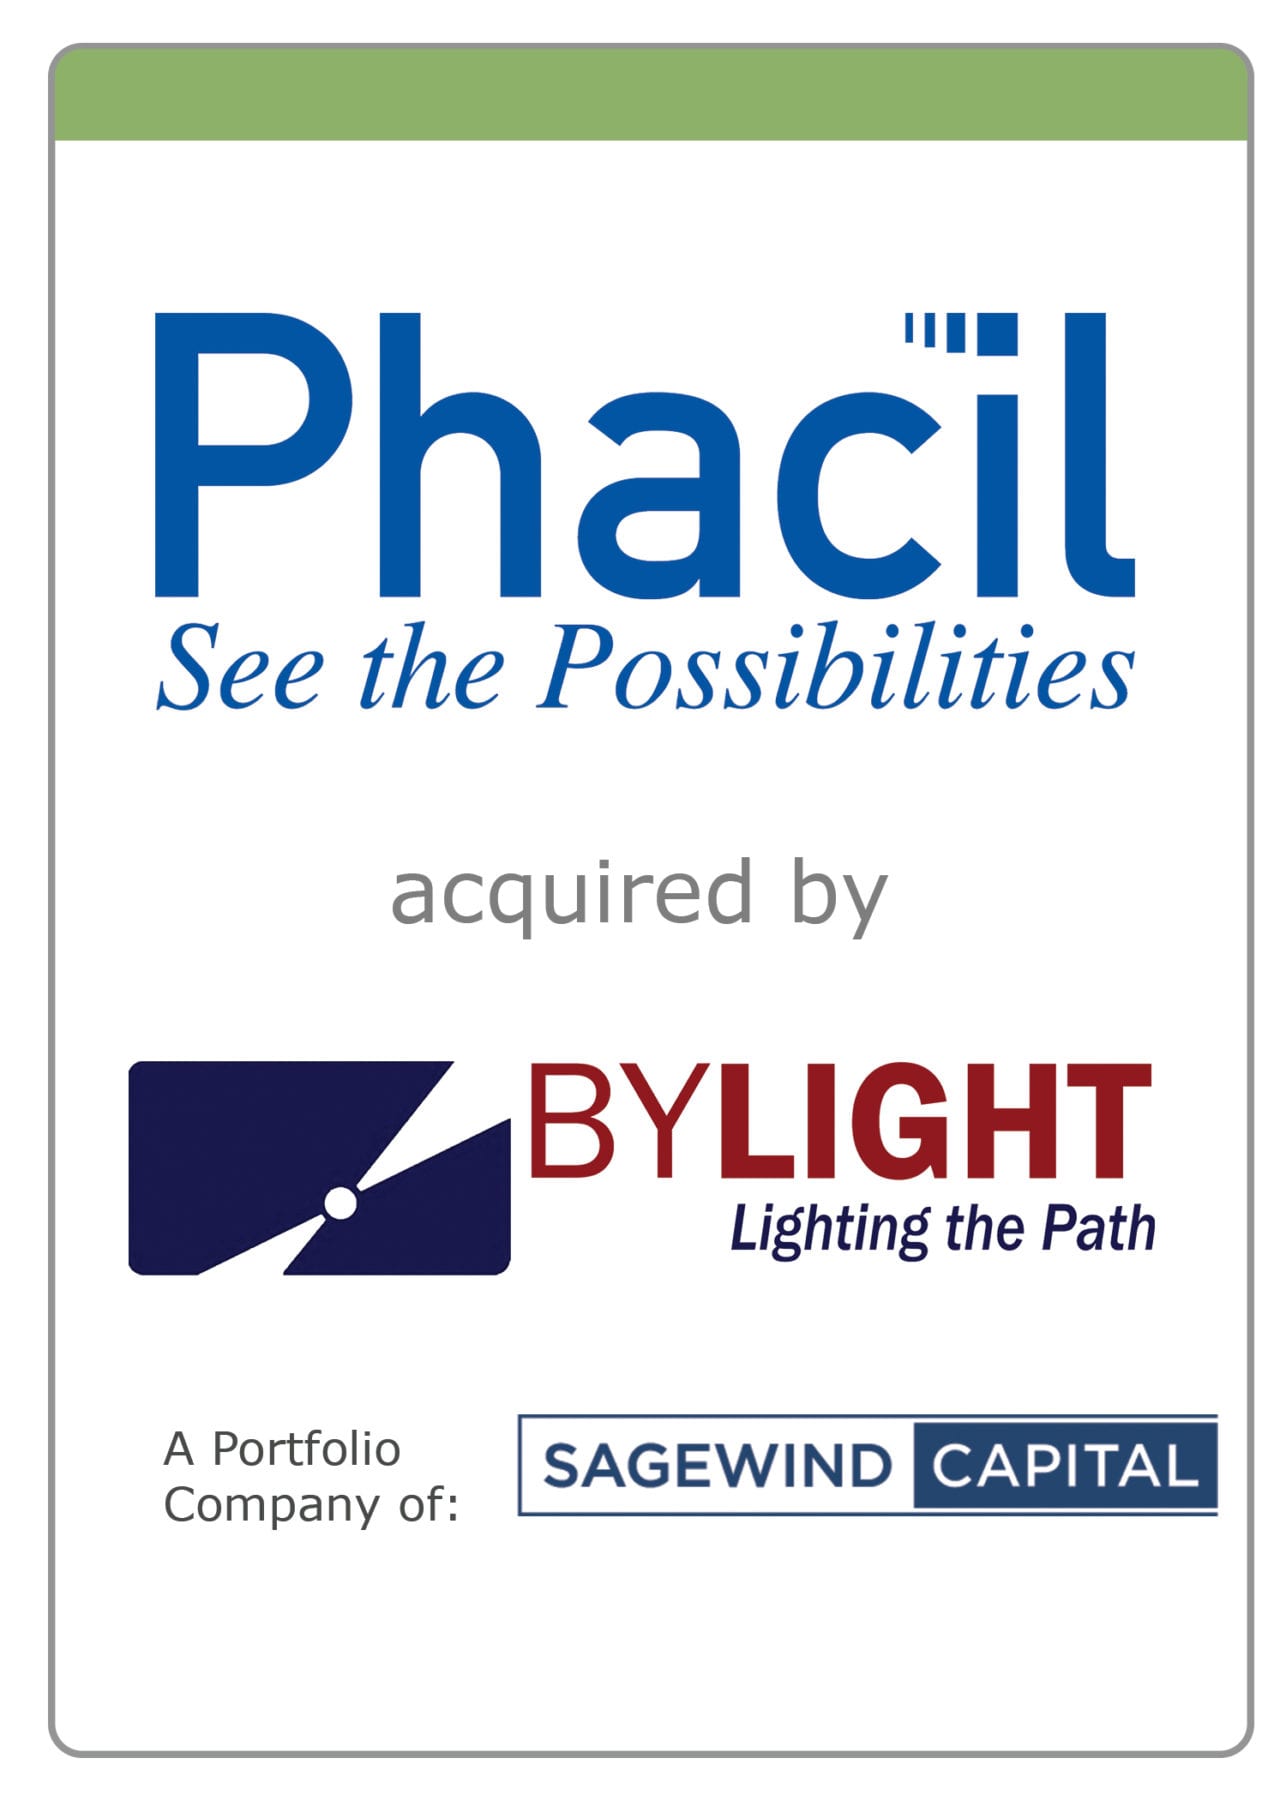 Phacil acquired by By Light